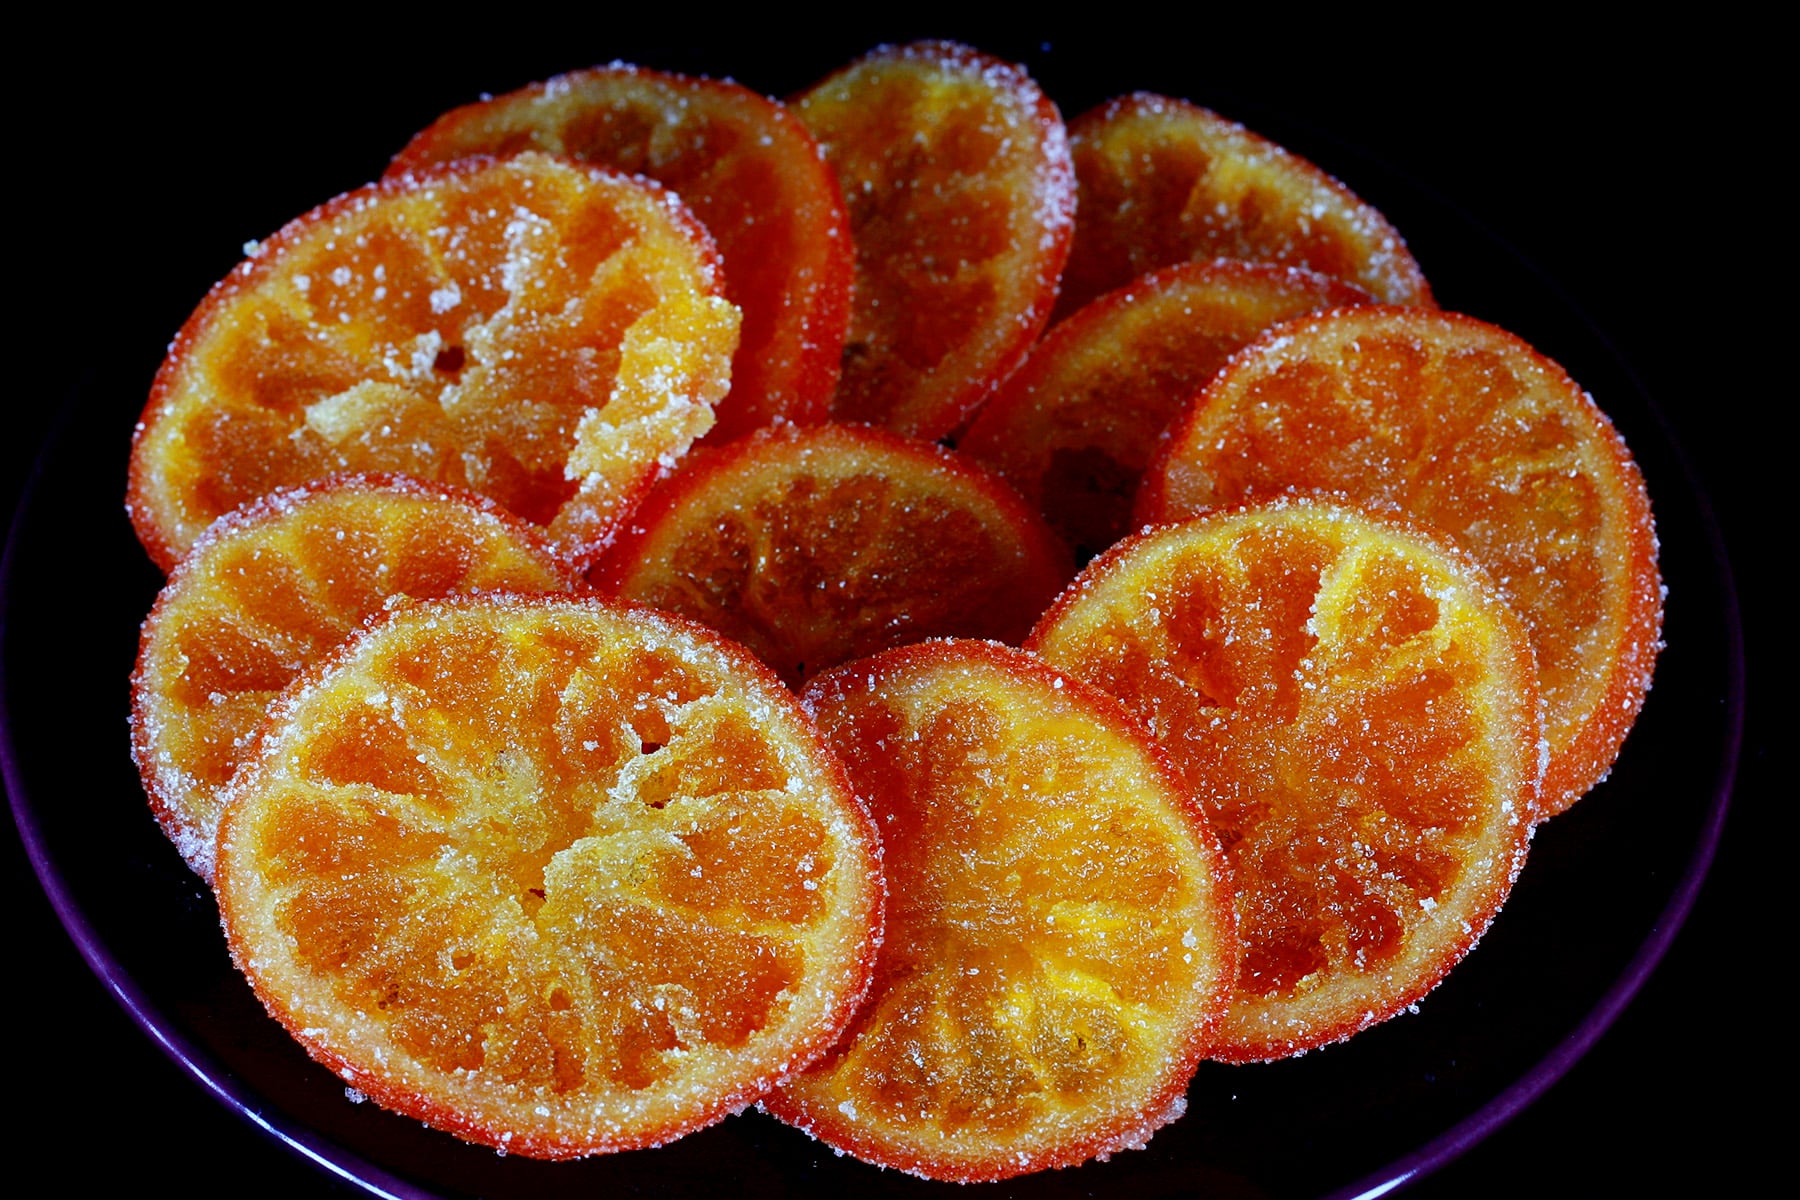 A blue plate with candied oranges arranged on it.